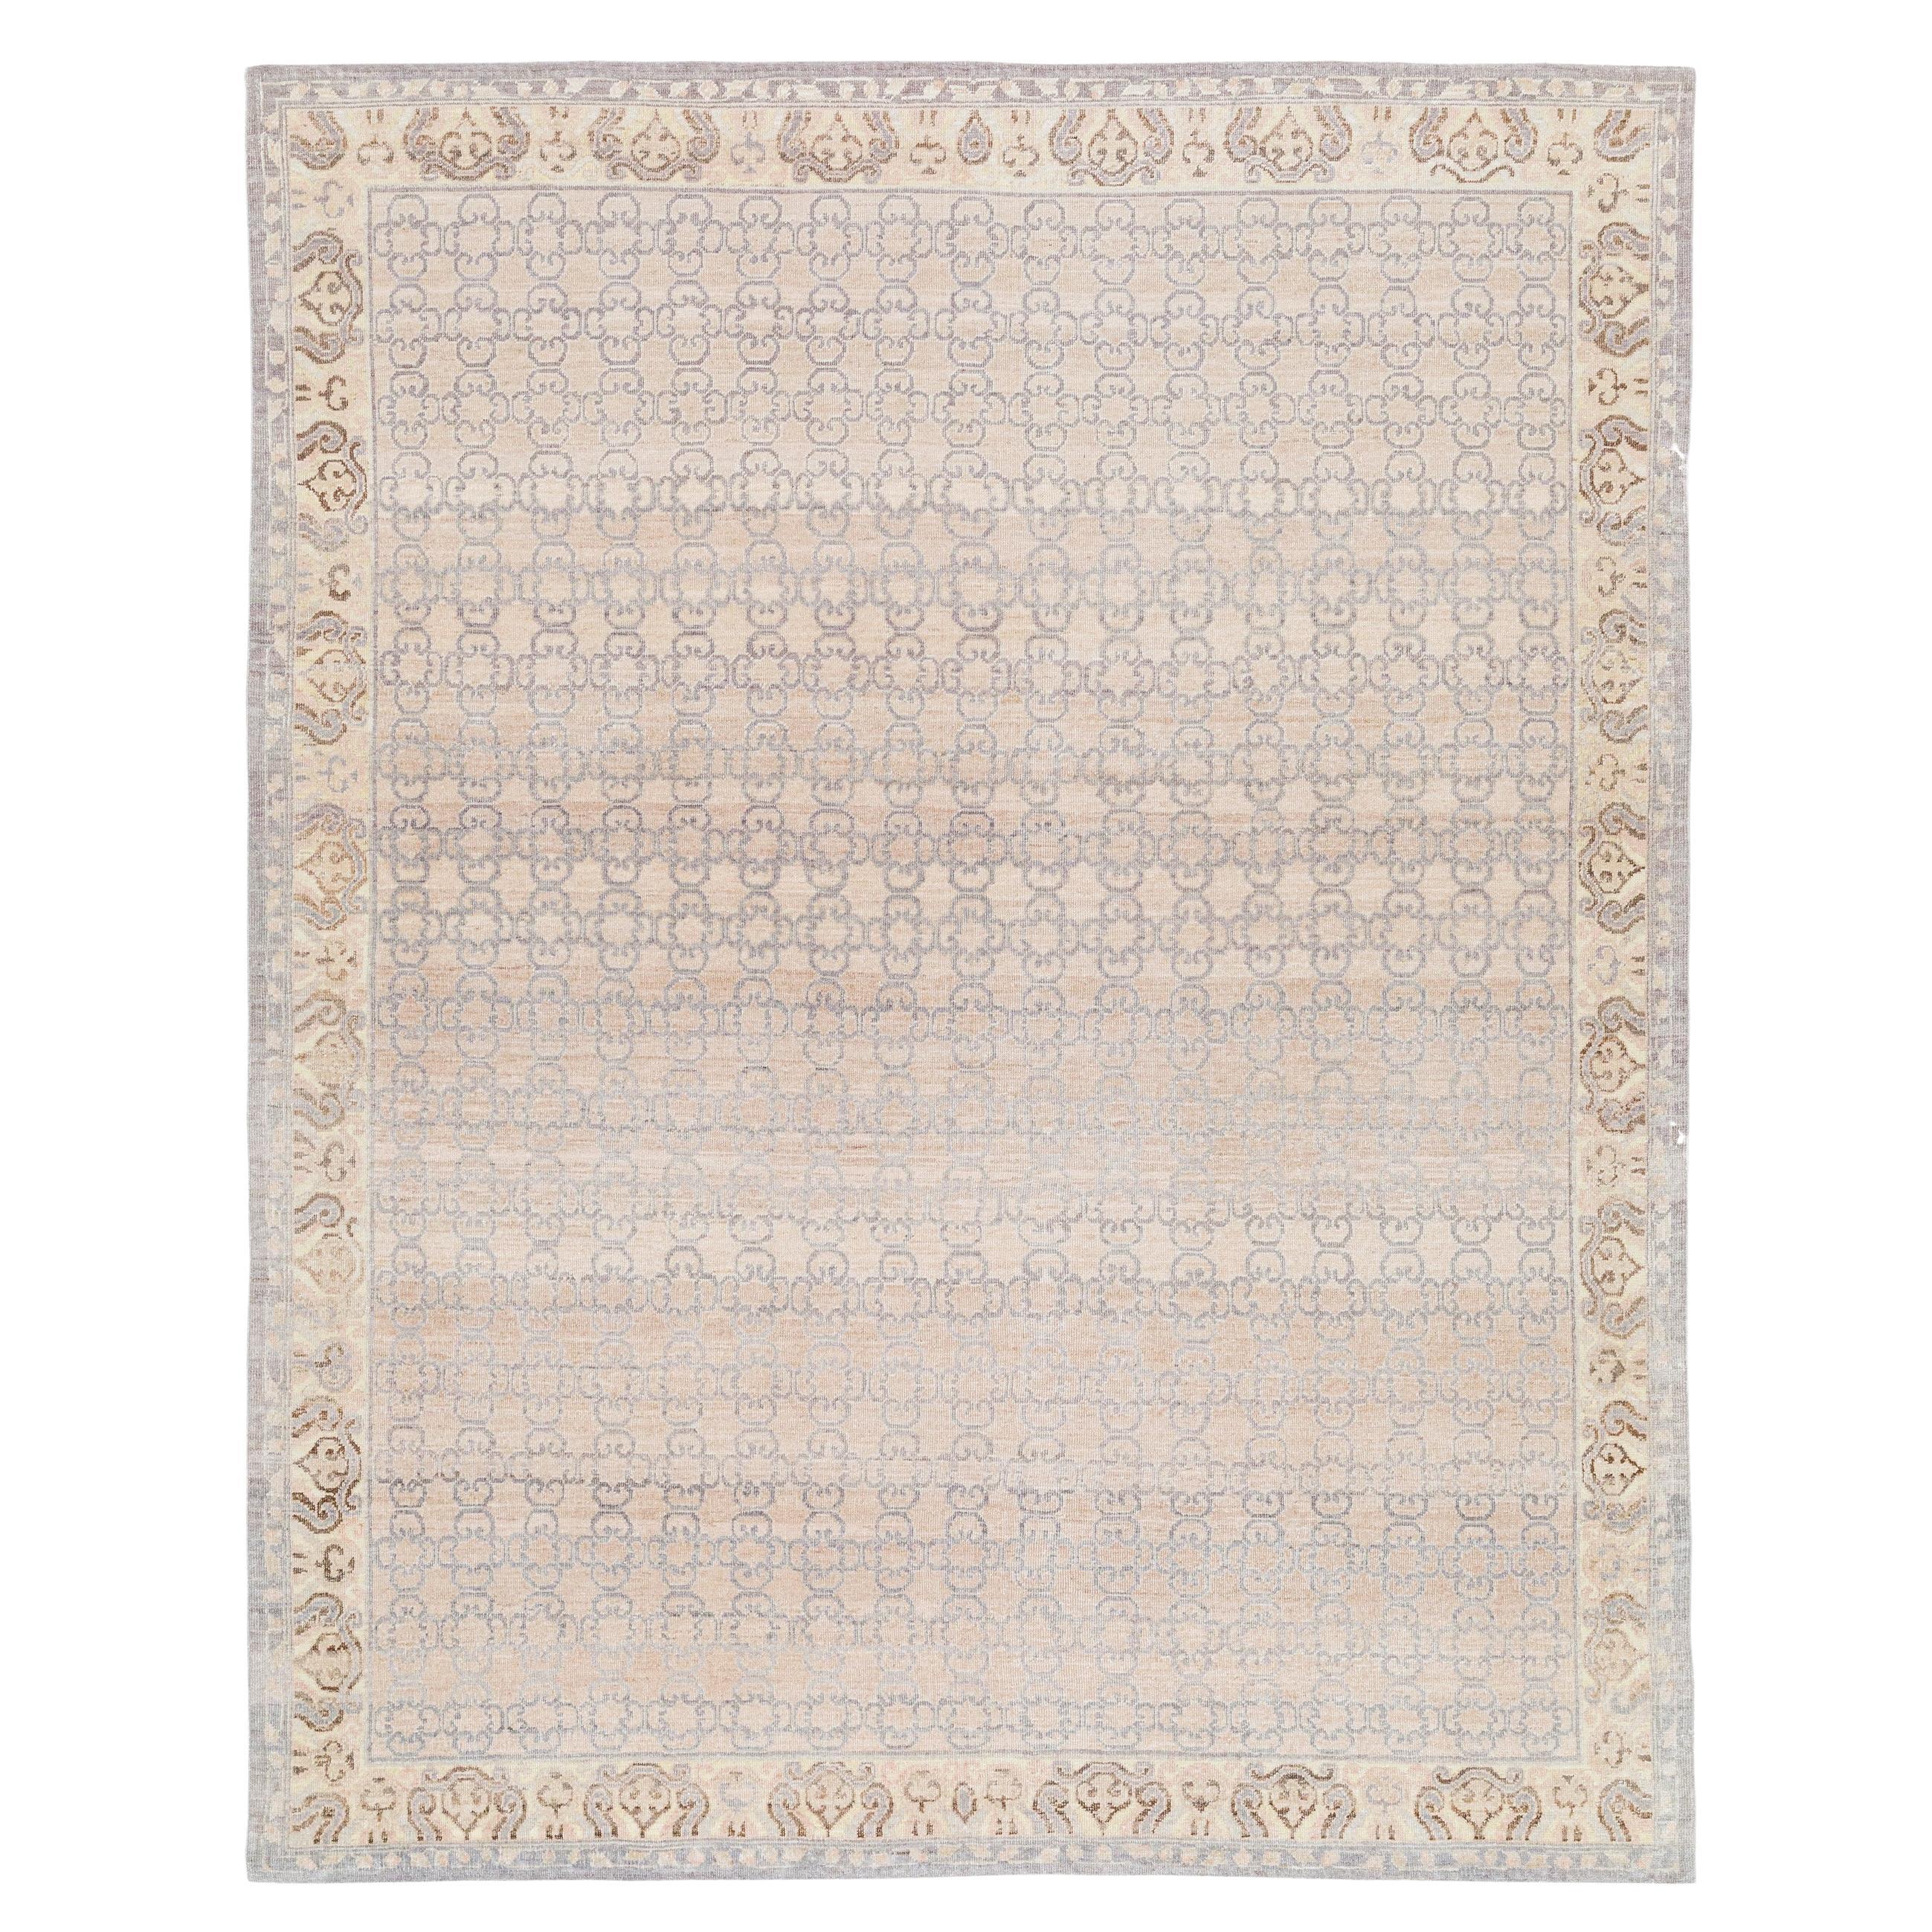 Decorative Handknotted Khotan Samarghand Style Rug For Sale